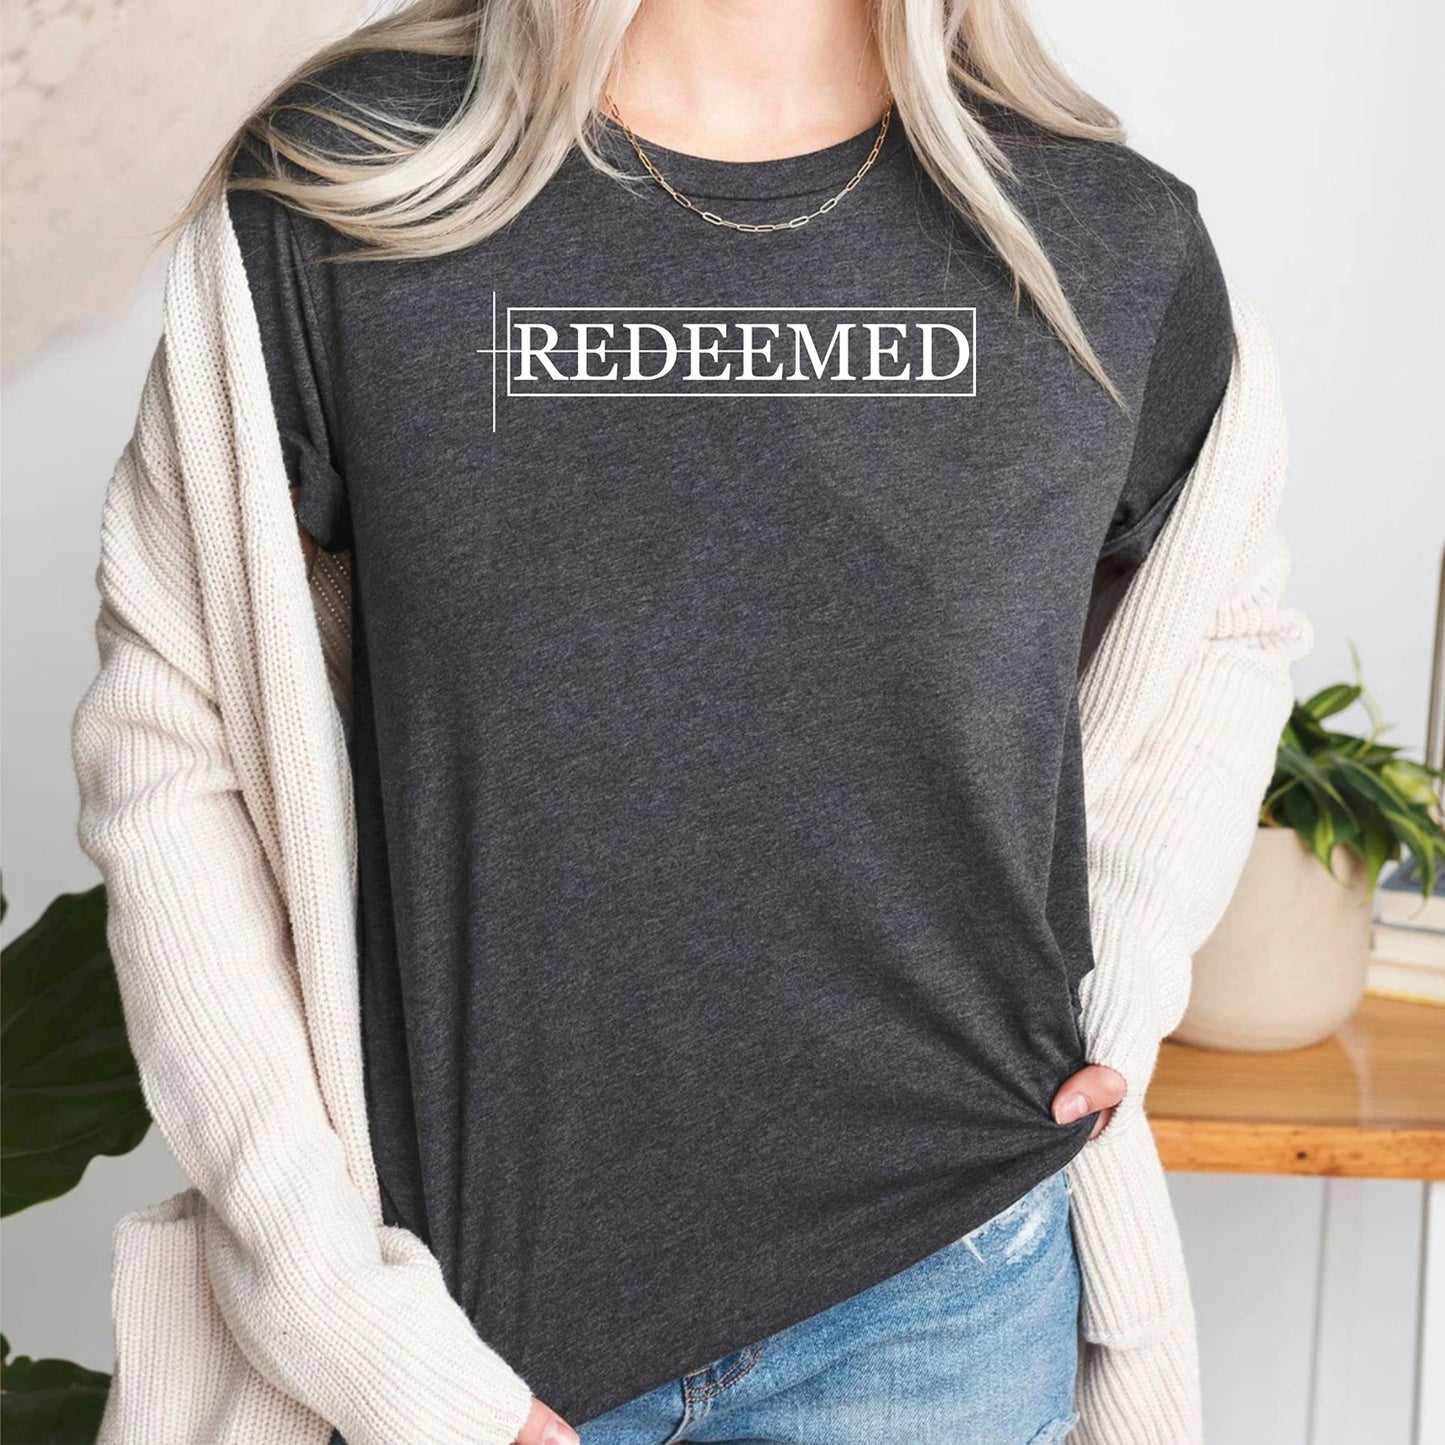 Redeemed Funny Christian Bible Verse Quotes Religious Jesus T-Shirt